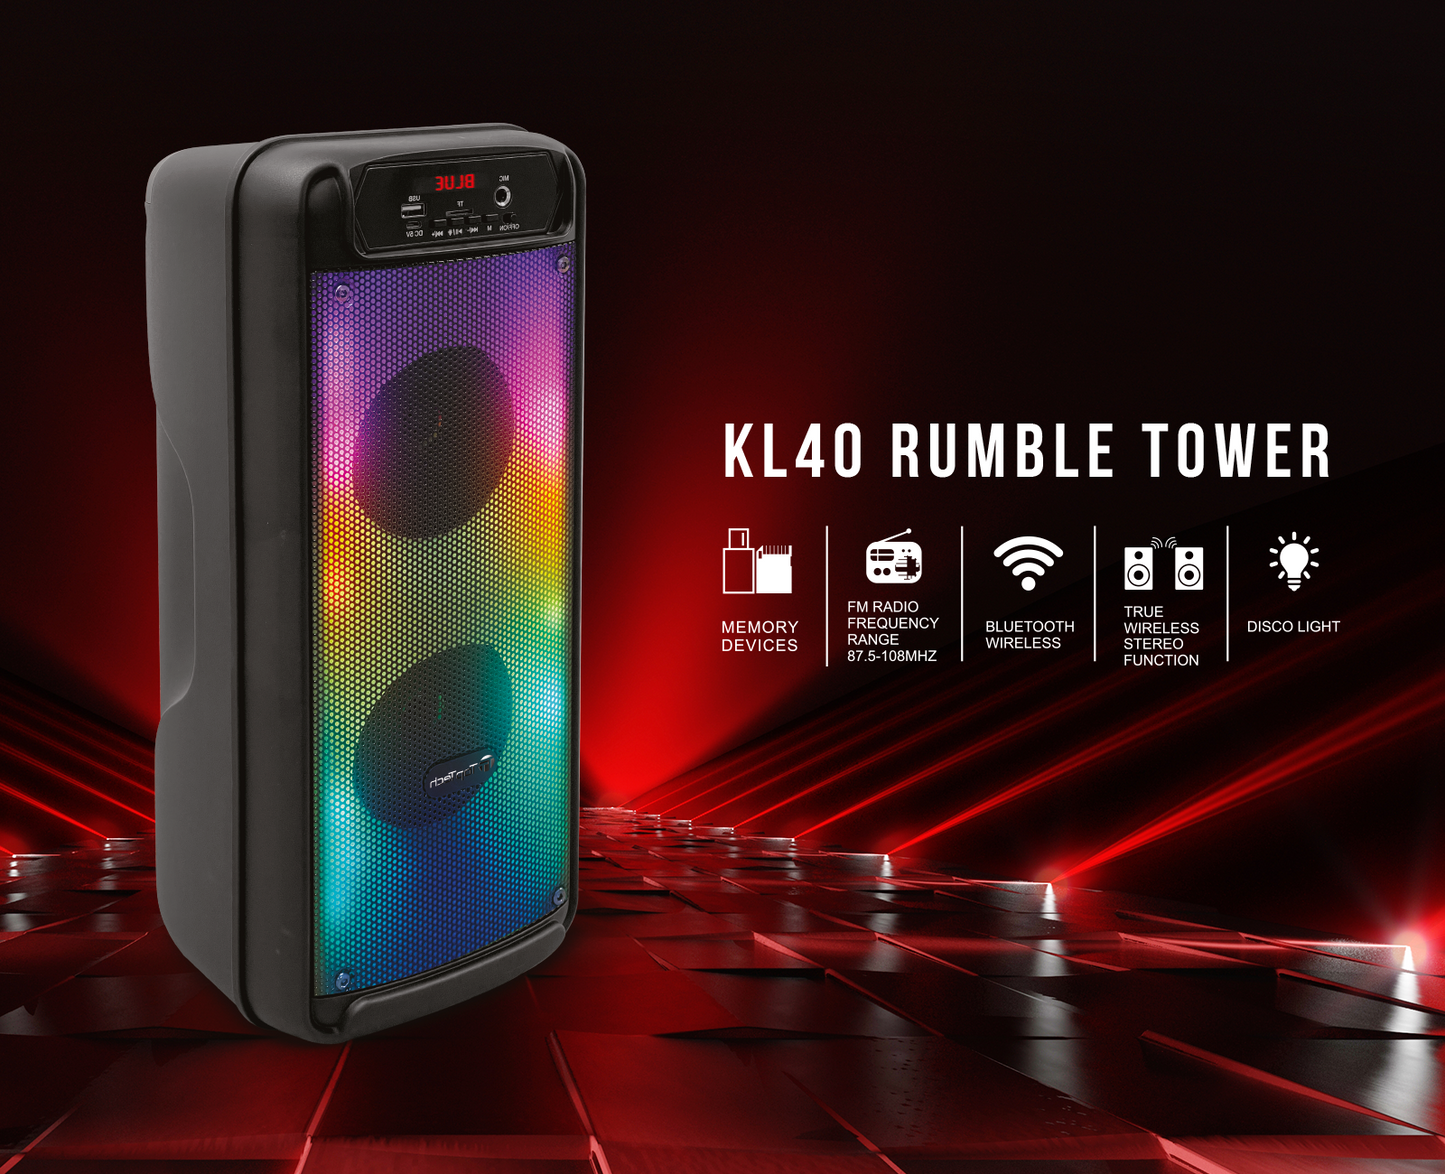 KL-40 RUMBLE TOWER